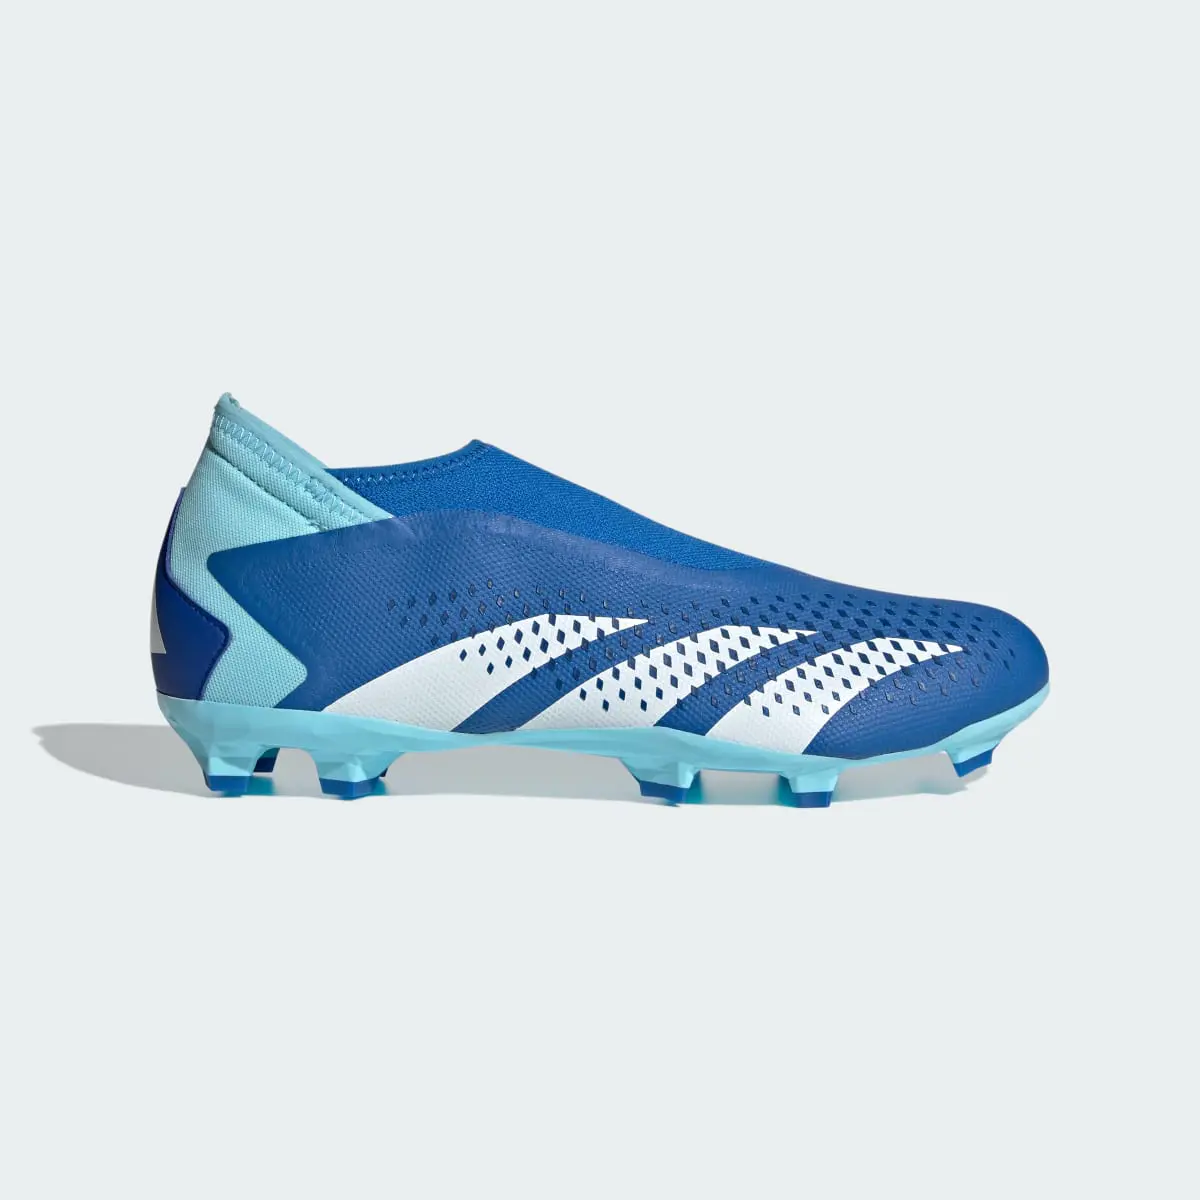 Adidas Predator Accuracy.3 Laceless Firm Ground Boots. 2